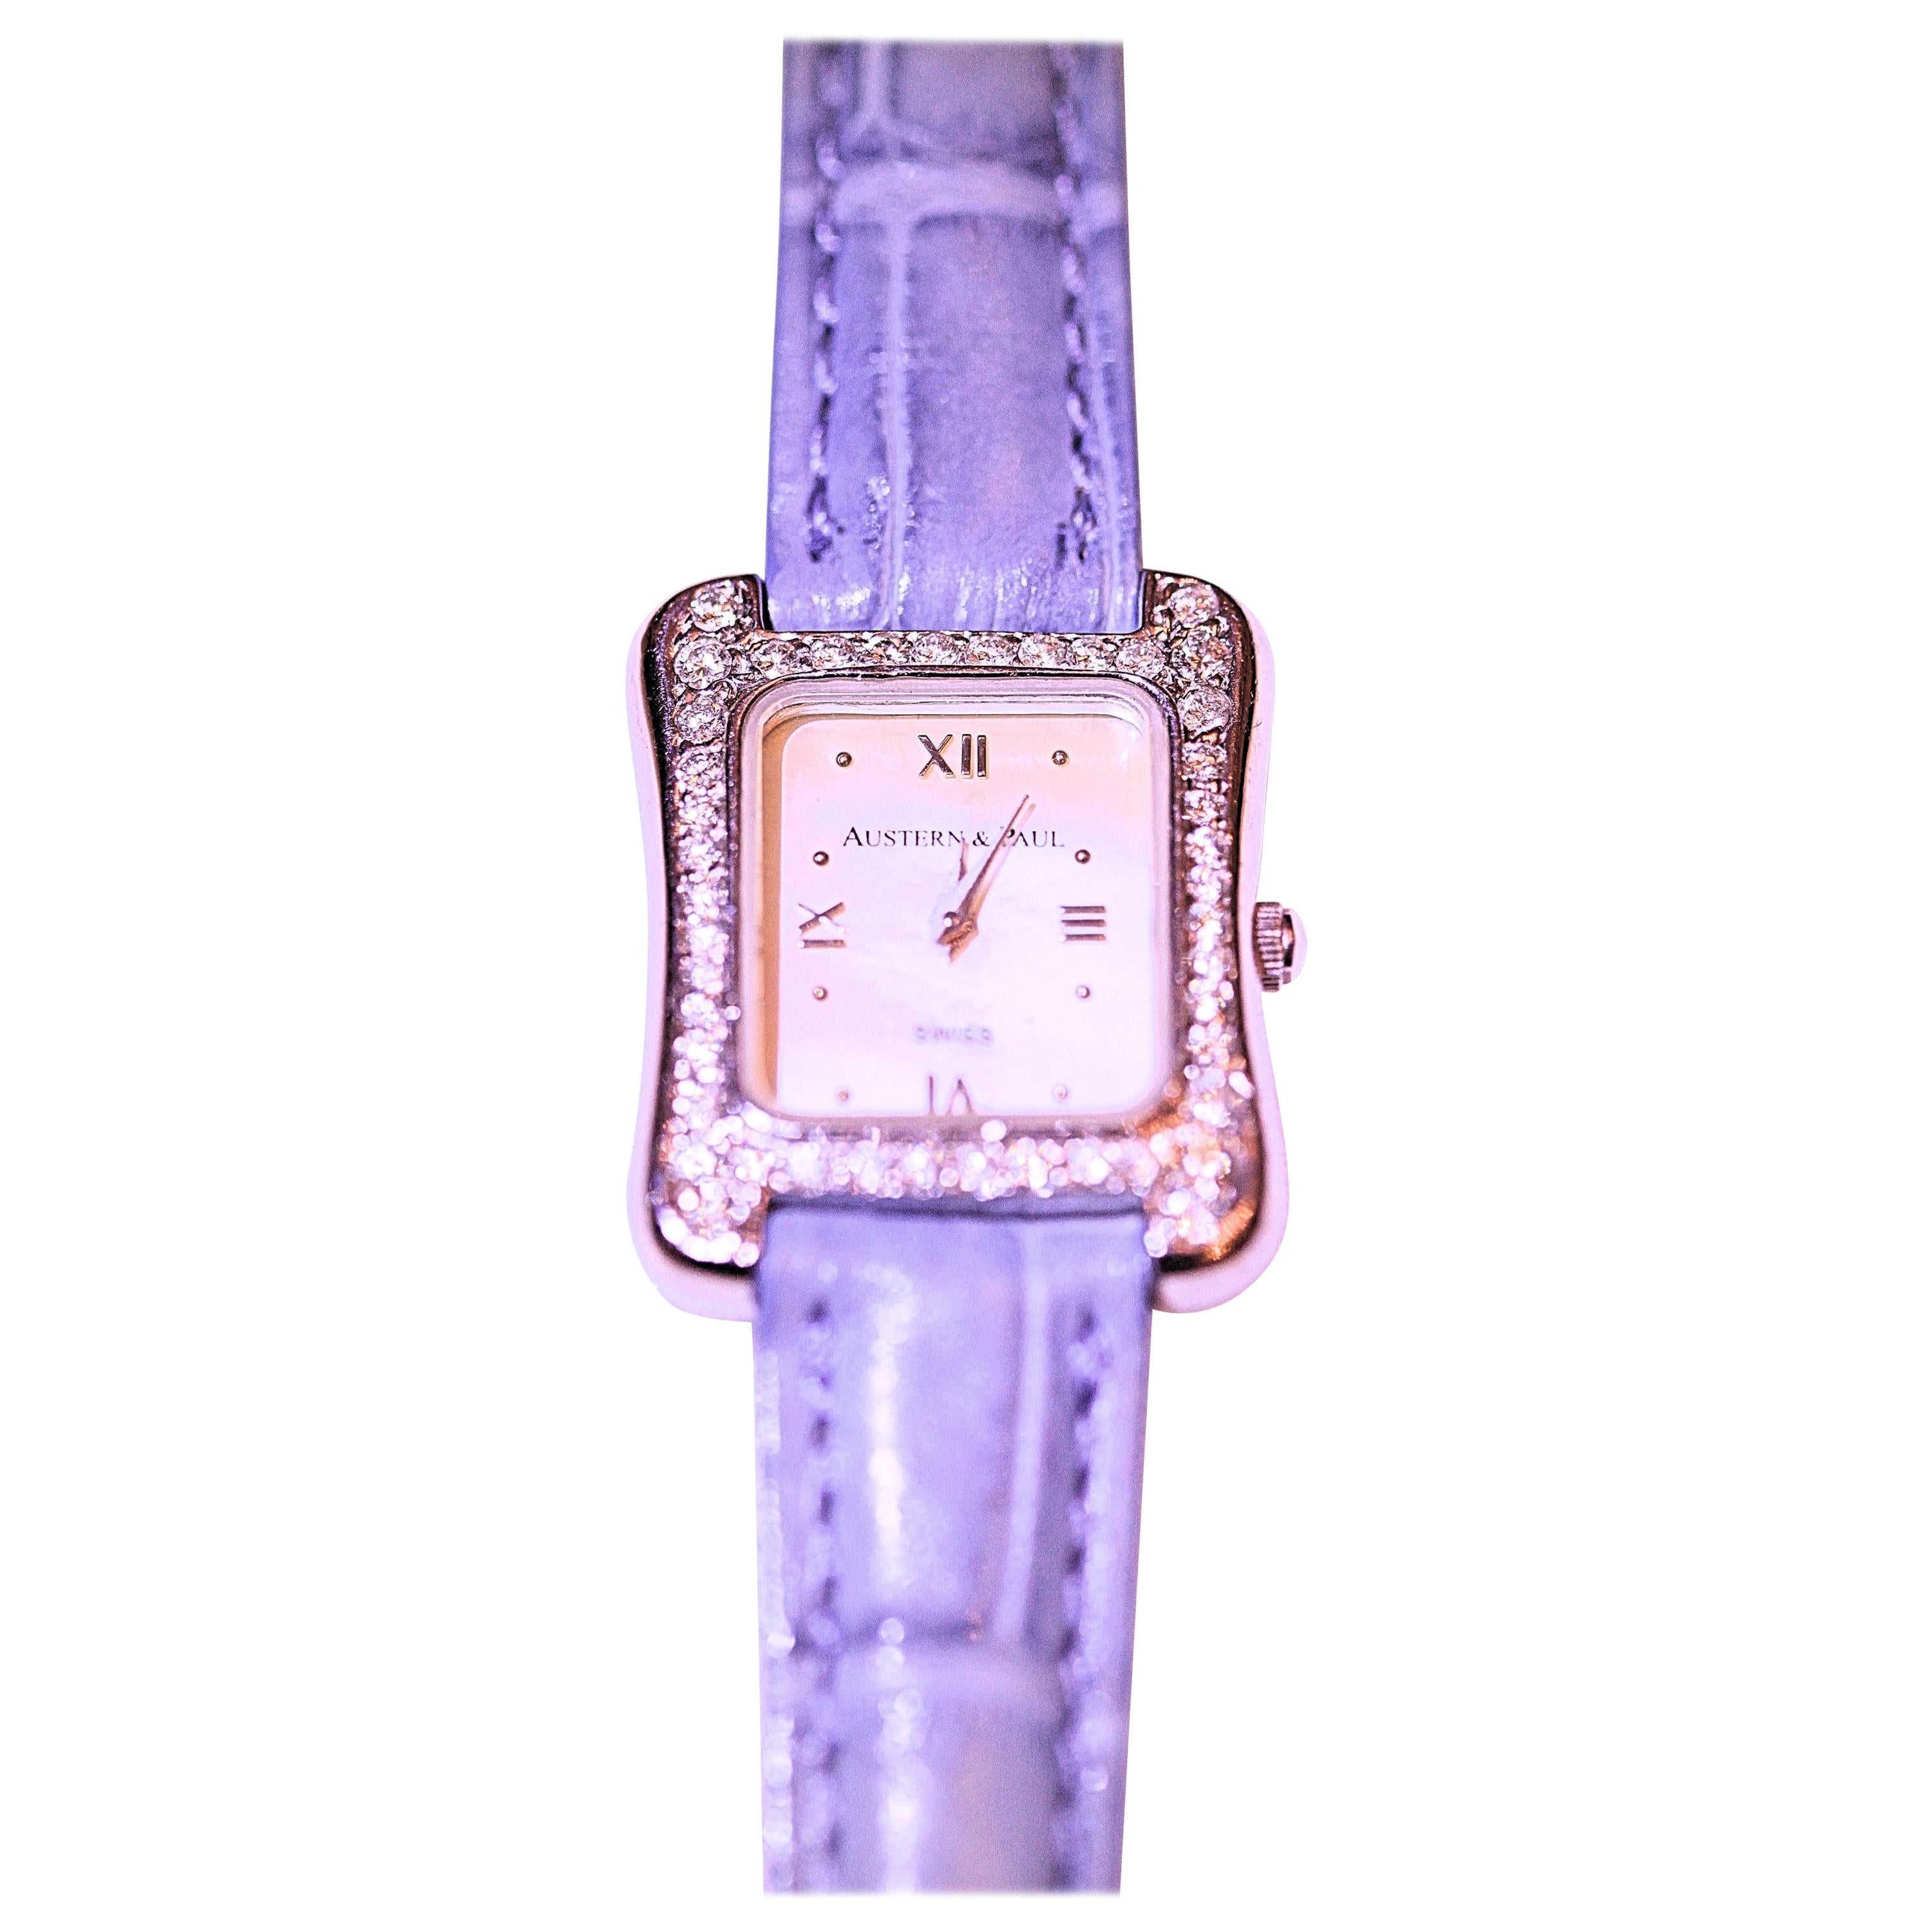 Austern Paul Diamond Tank Watch Mother of Pearl Dial 14 Karat White Gold Leather For Sale